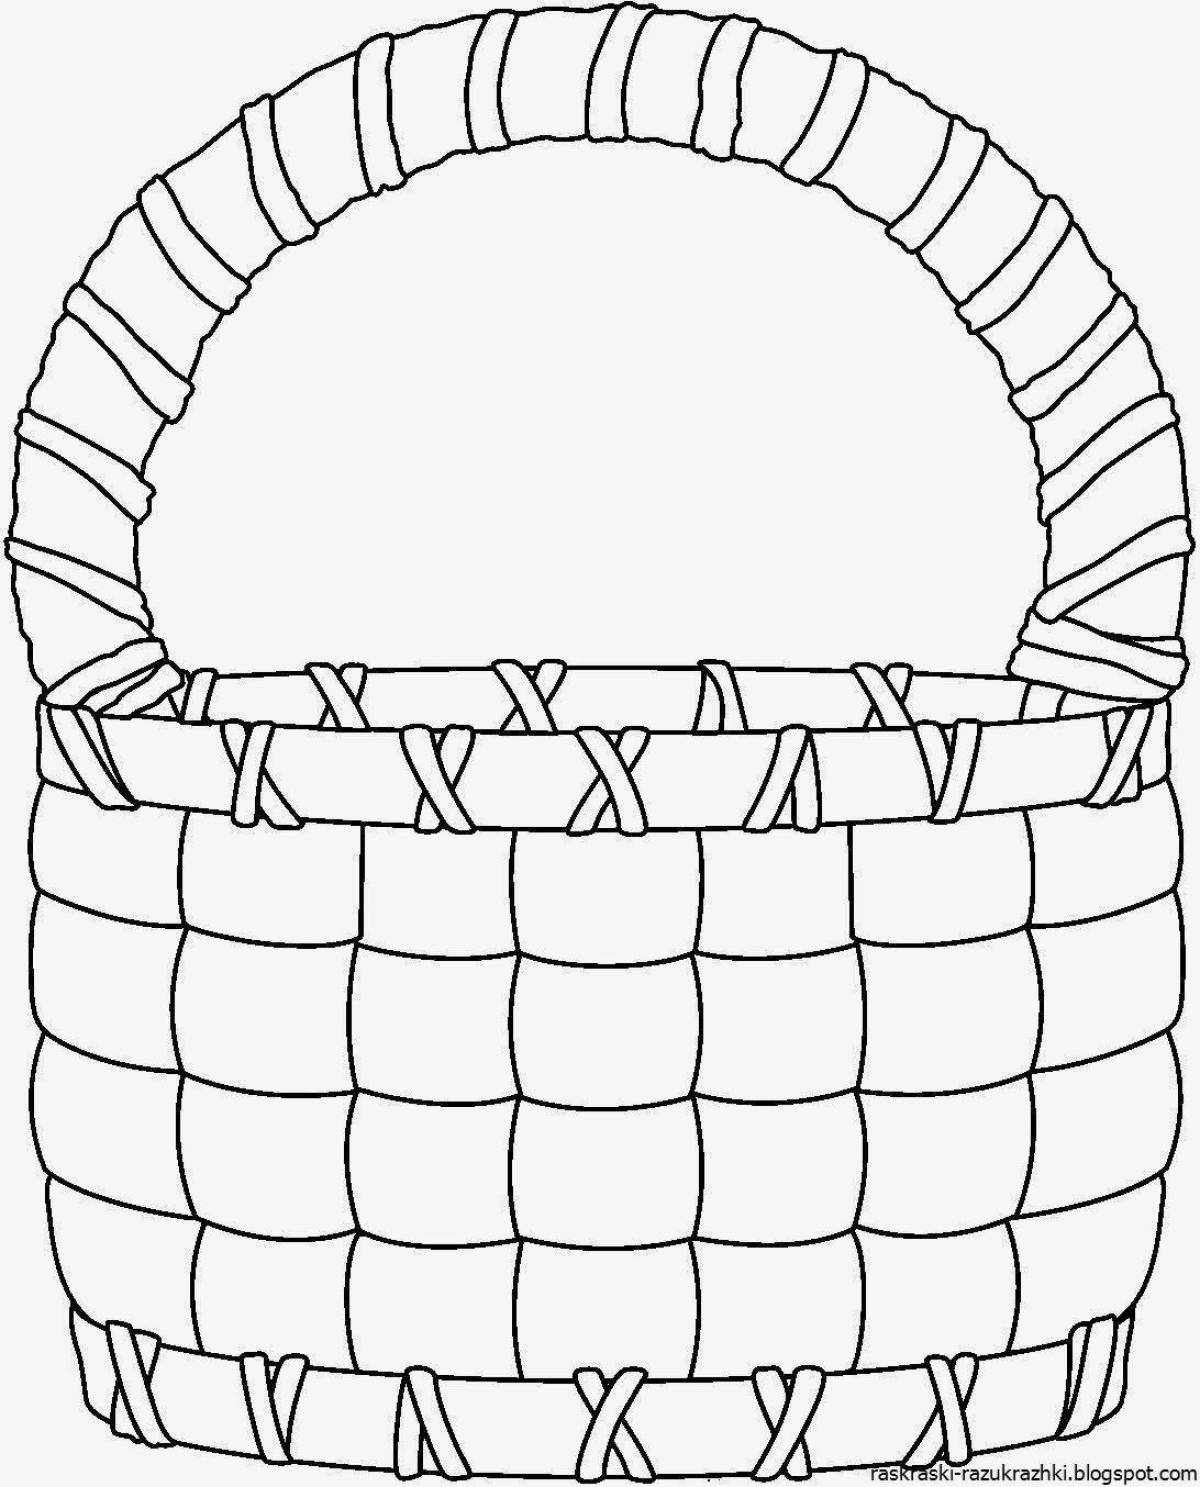 Sparkling Basket Coloring Page for Toddlers